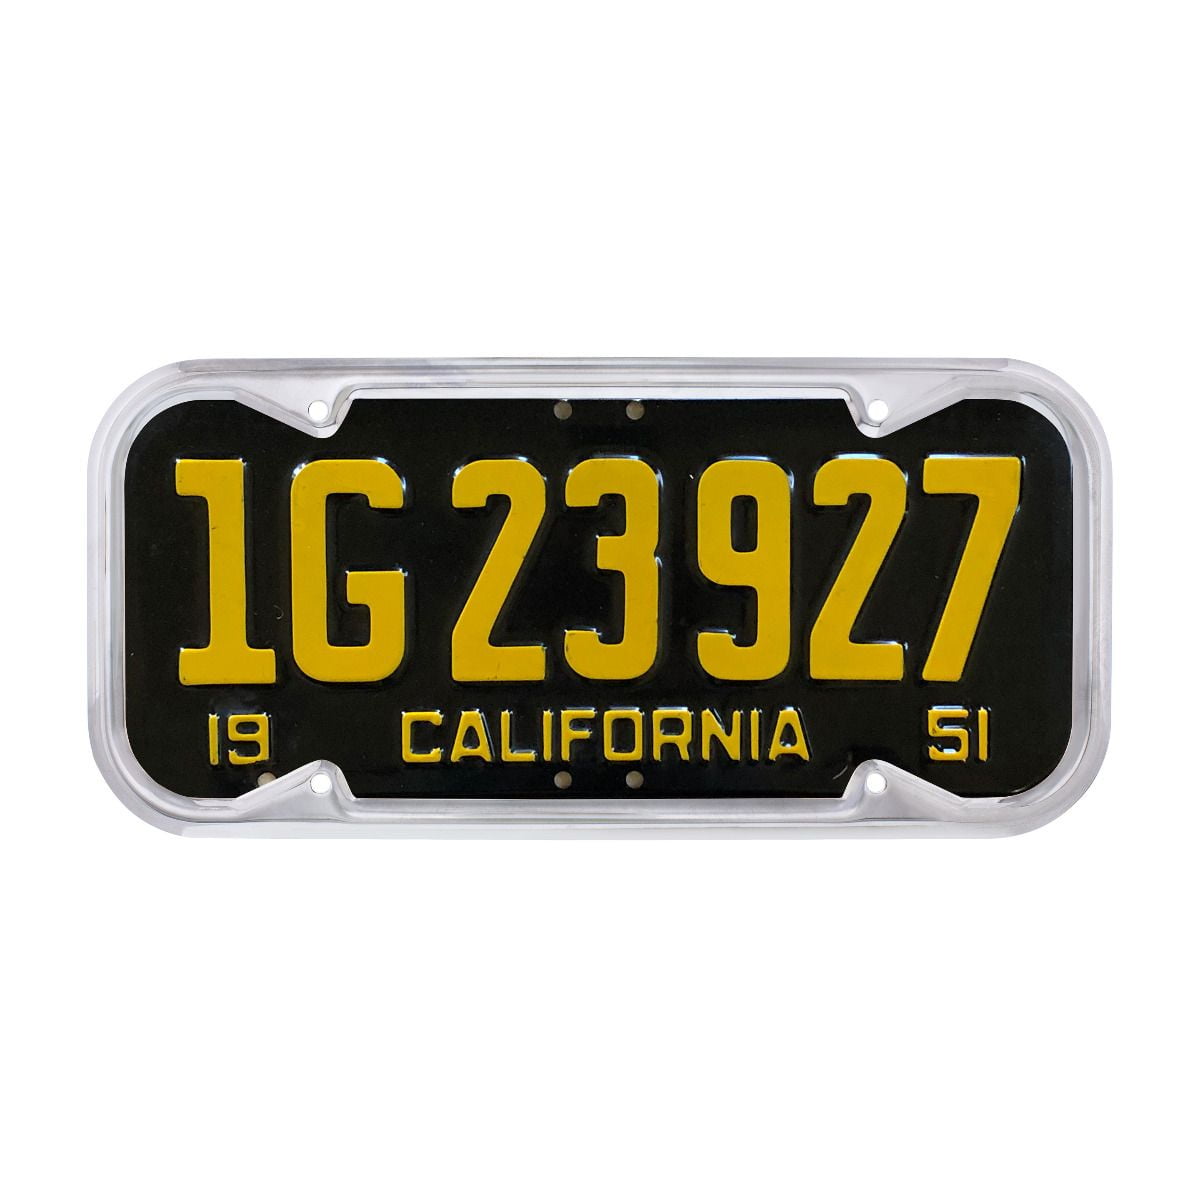 NEW PAIR 40 TO 55 CHROME METAL VINTAGE STYLE CALIFORNIA LICENSE PLATE FRAMES 